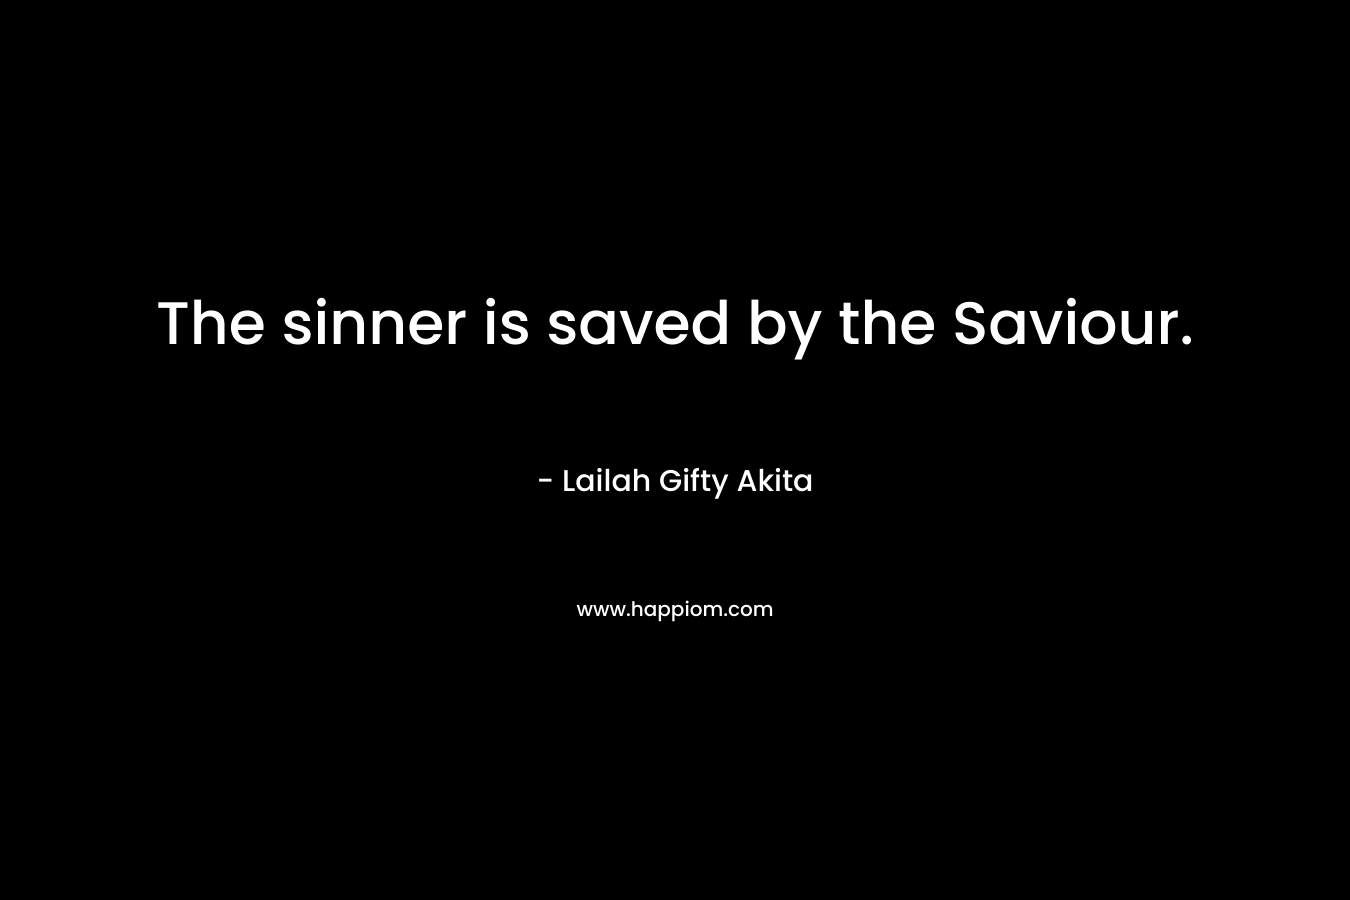 The sinner is saved by the Saviour. – Lailah Gifty Akita